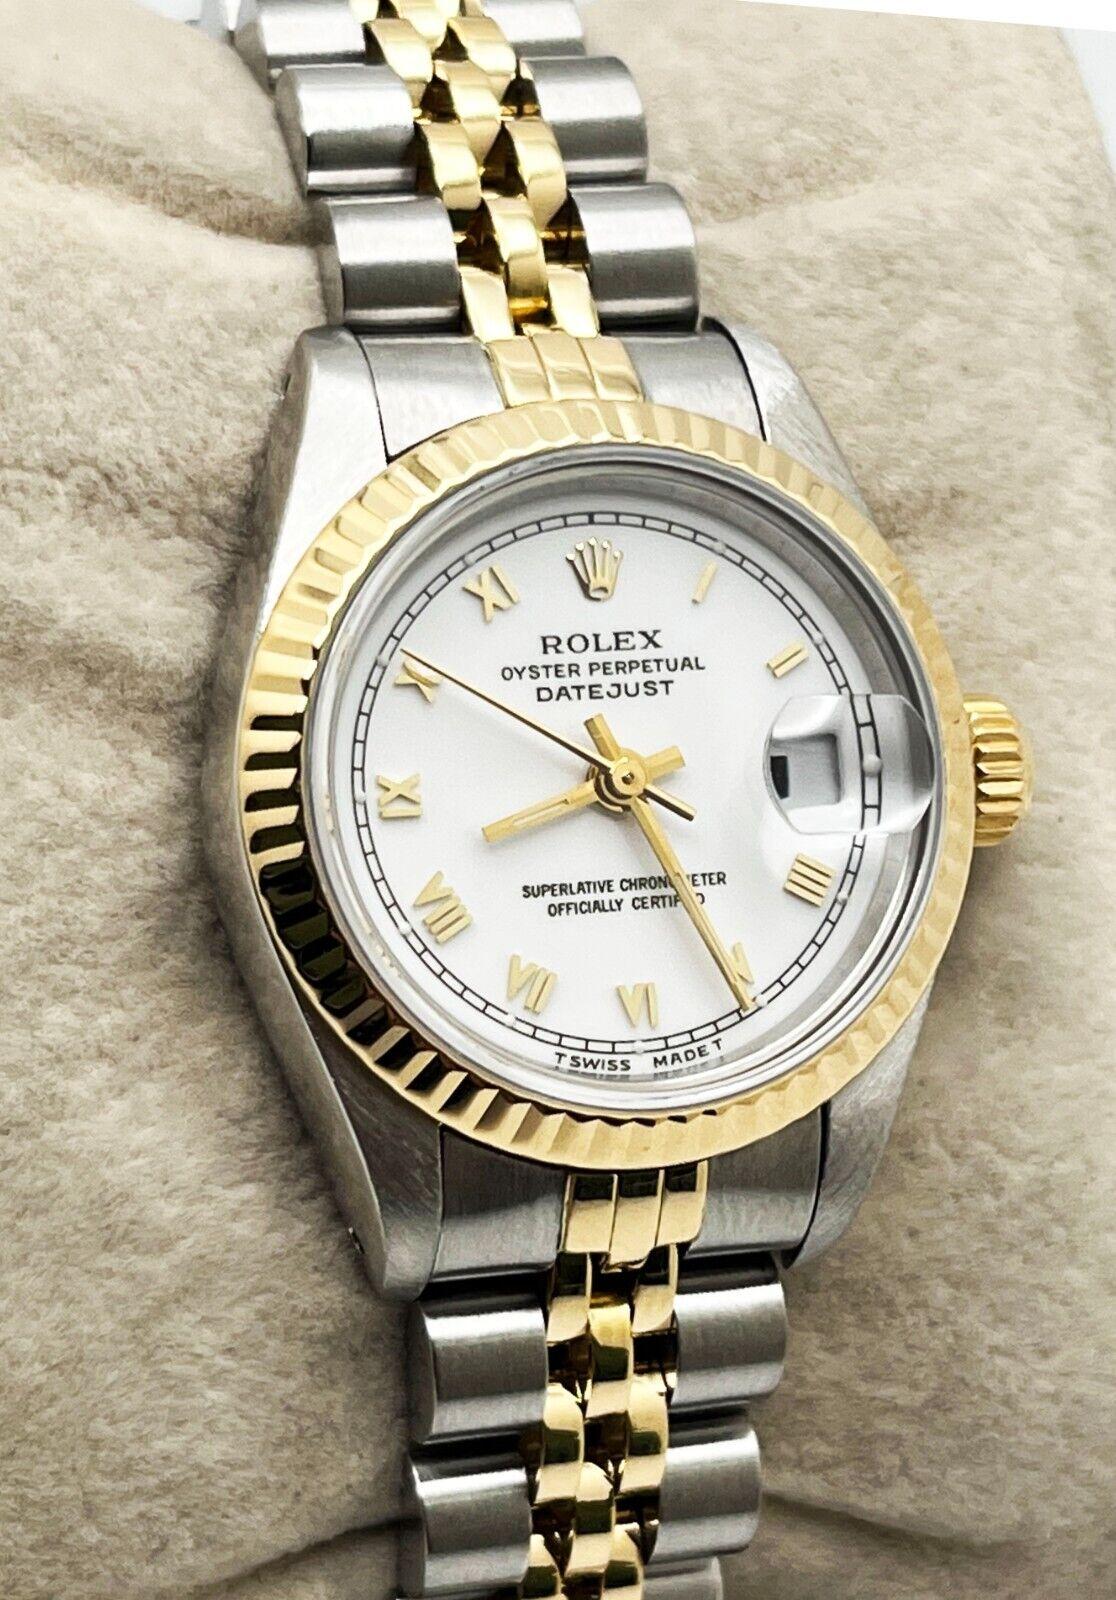 Style Number: R691733

Serial:  X235***

Year: 1991
 
Model: Ladies Datejust
 
Case Material: Stainless Steel
 
Band: 18K Yellow Gold & Stainless Steel
 
Bezel: 18K Yellow Gold
 
Dial: White Roman Dial
 
Face: Sapphire Crystal
 
Case Size: 26mm
